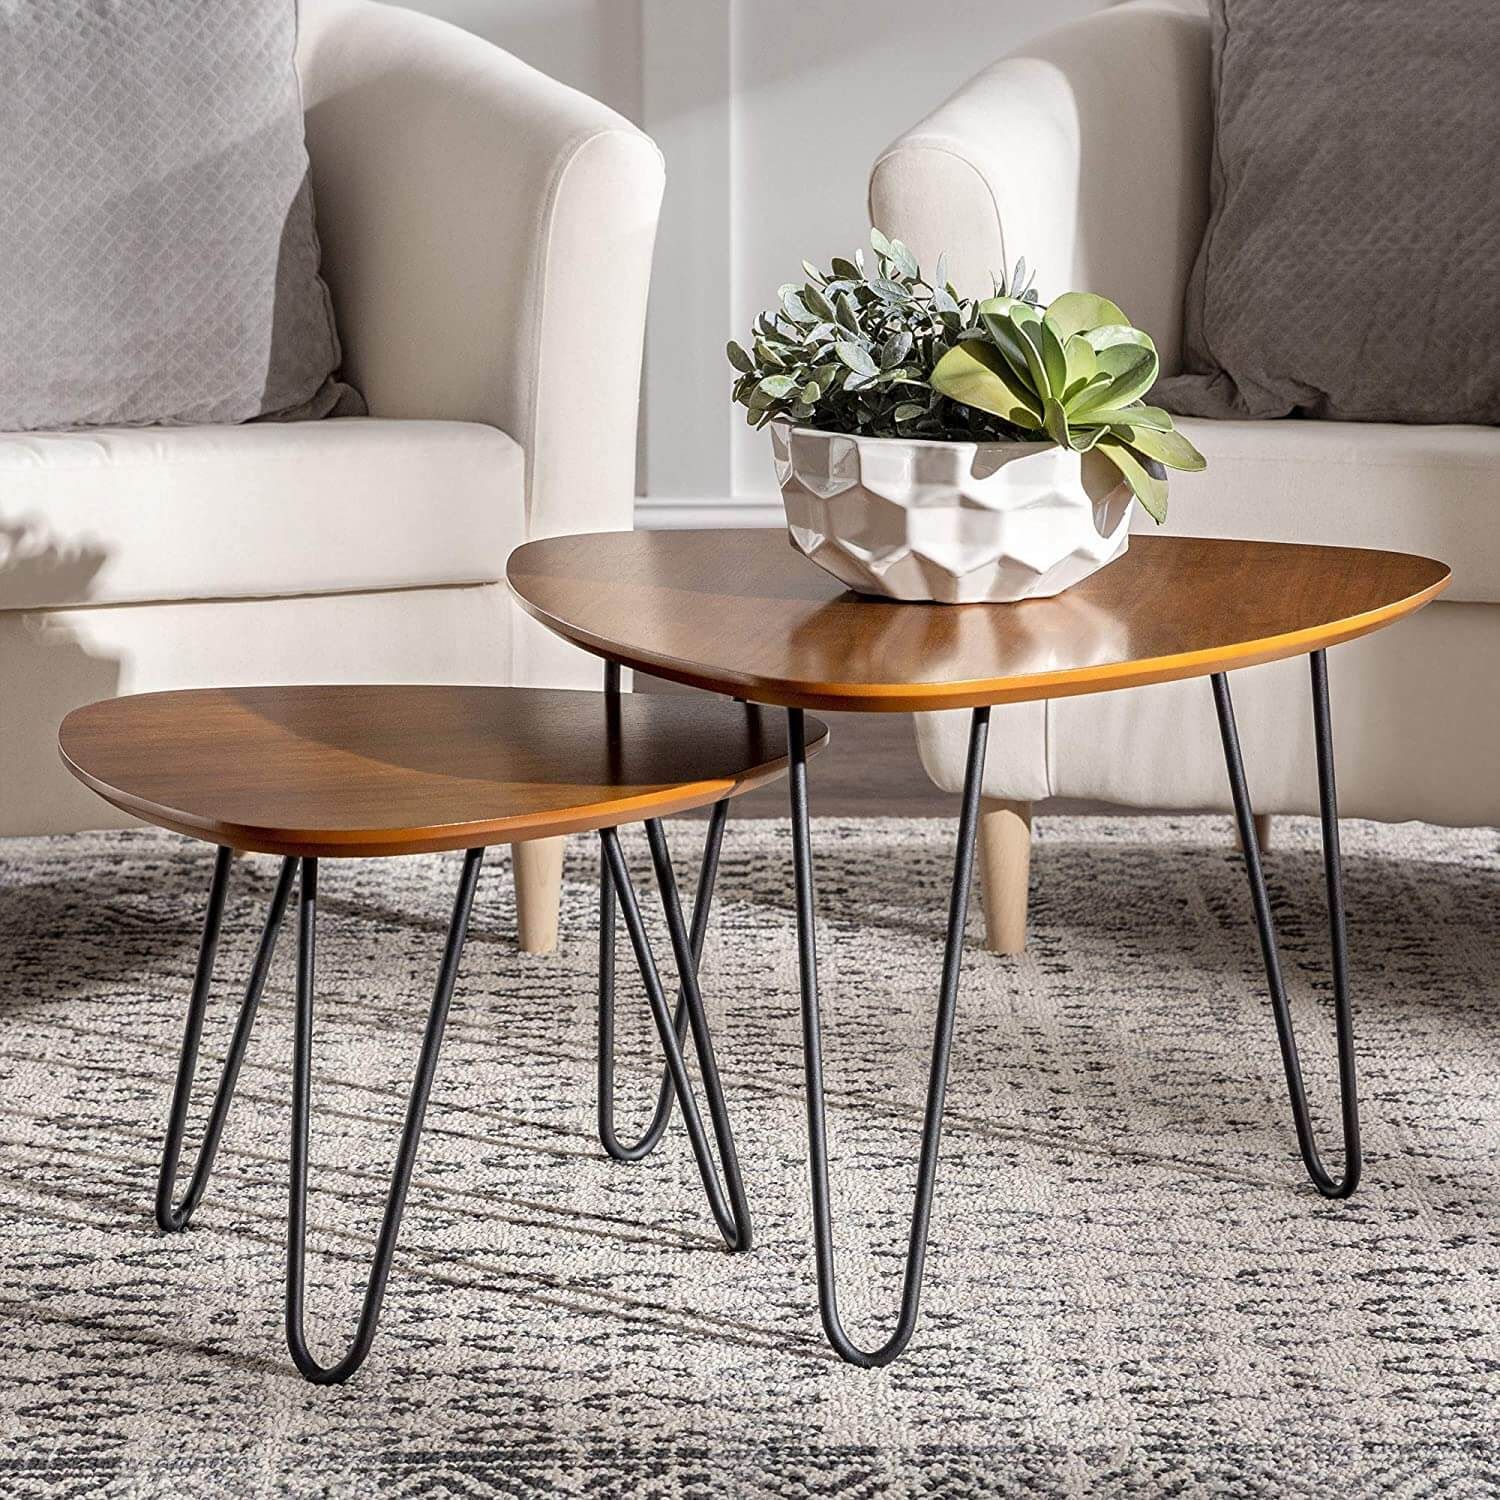 Choosing The Perfect Mid Century Modern Coffee Table – Oceanone Interiors With Regard To Mid Century Modern Coffee Tables (Gallery 14 of 20)